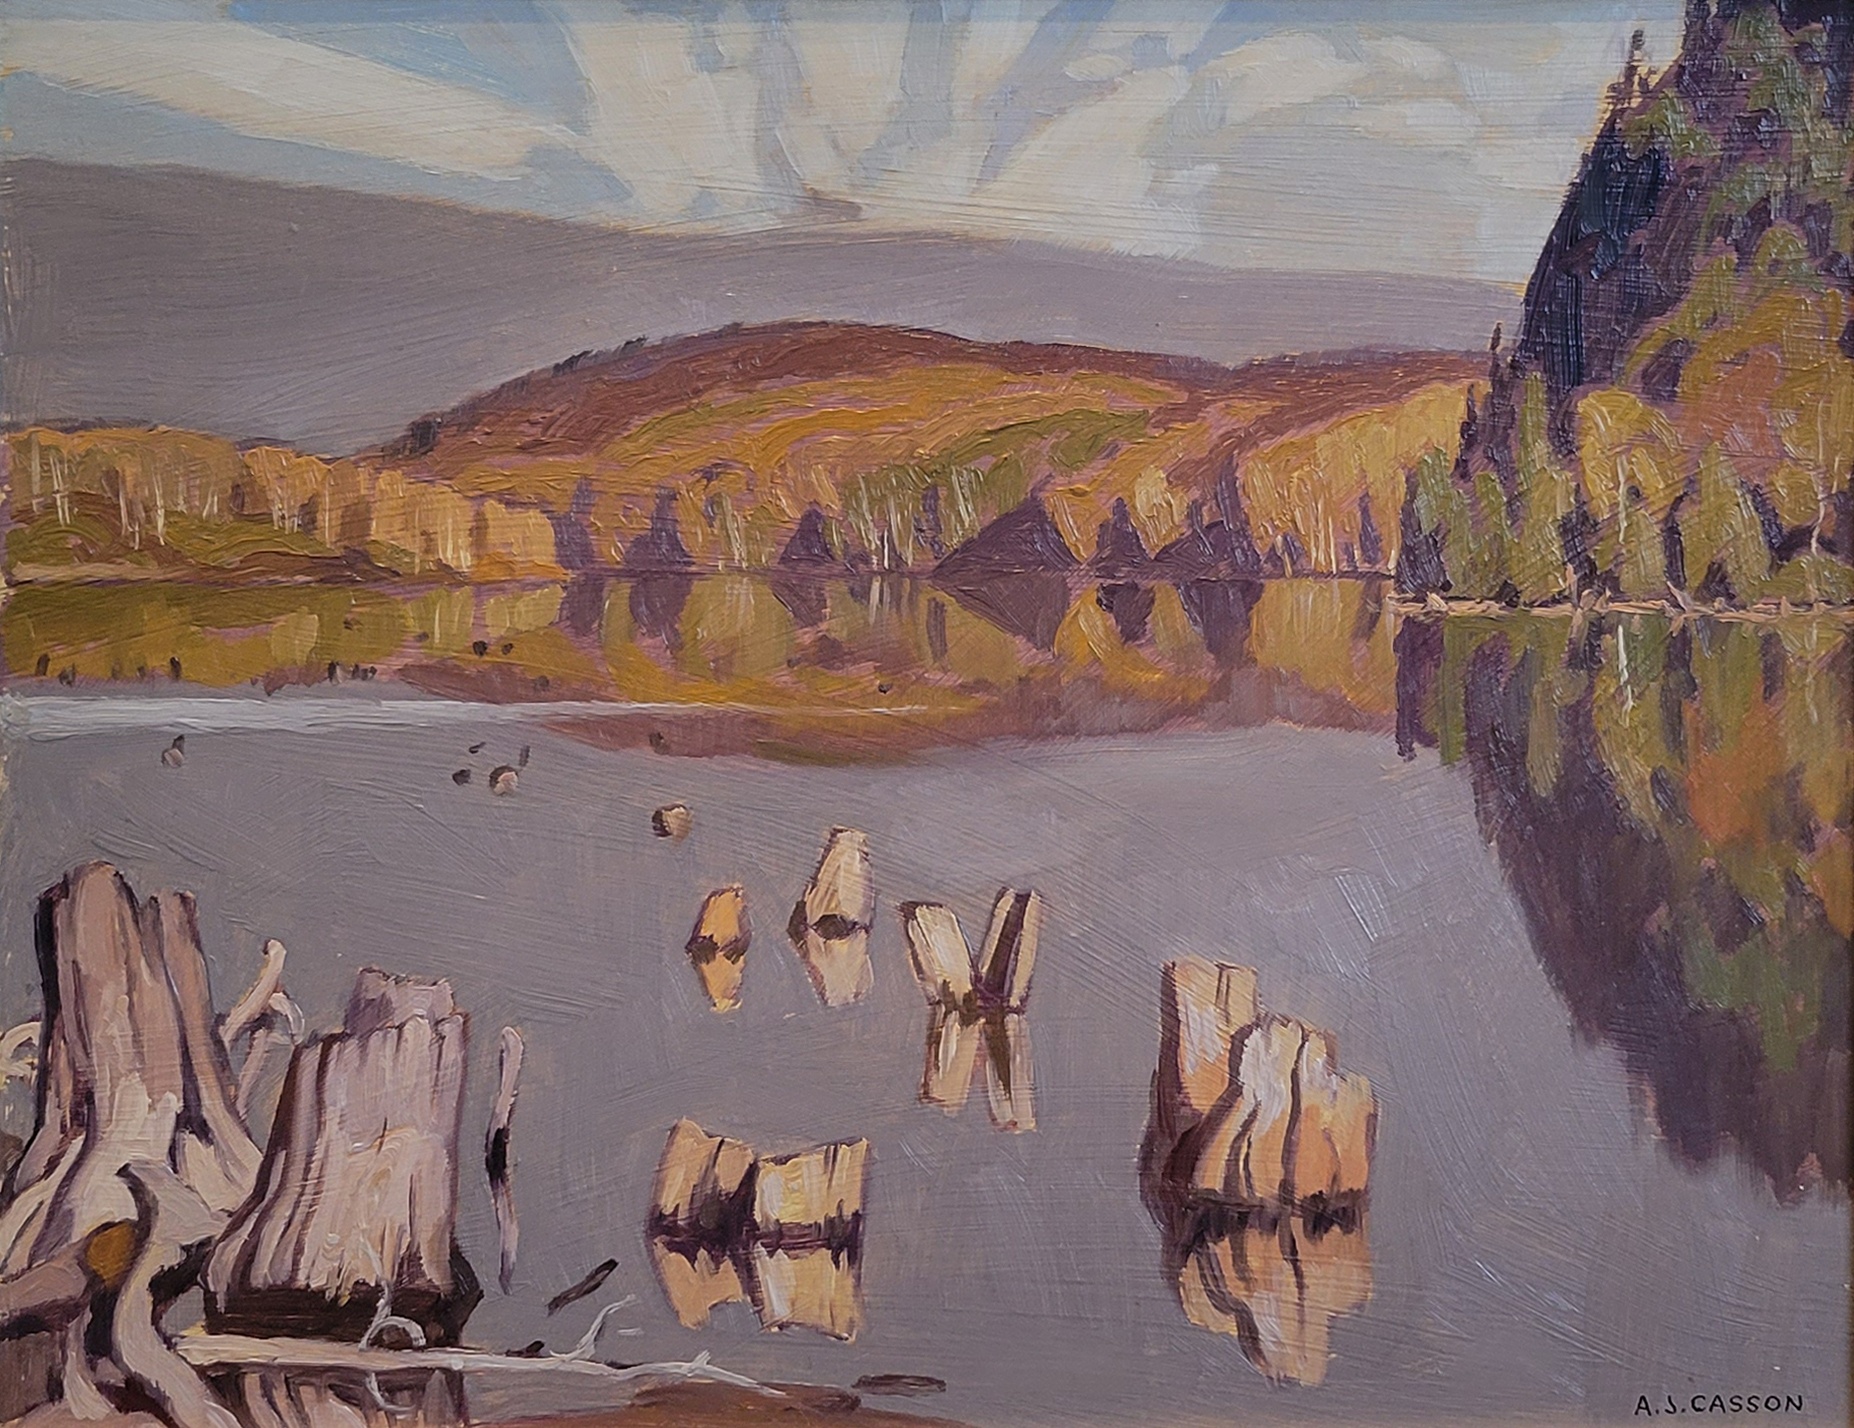 Alfred J. Casson (1898-1992)